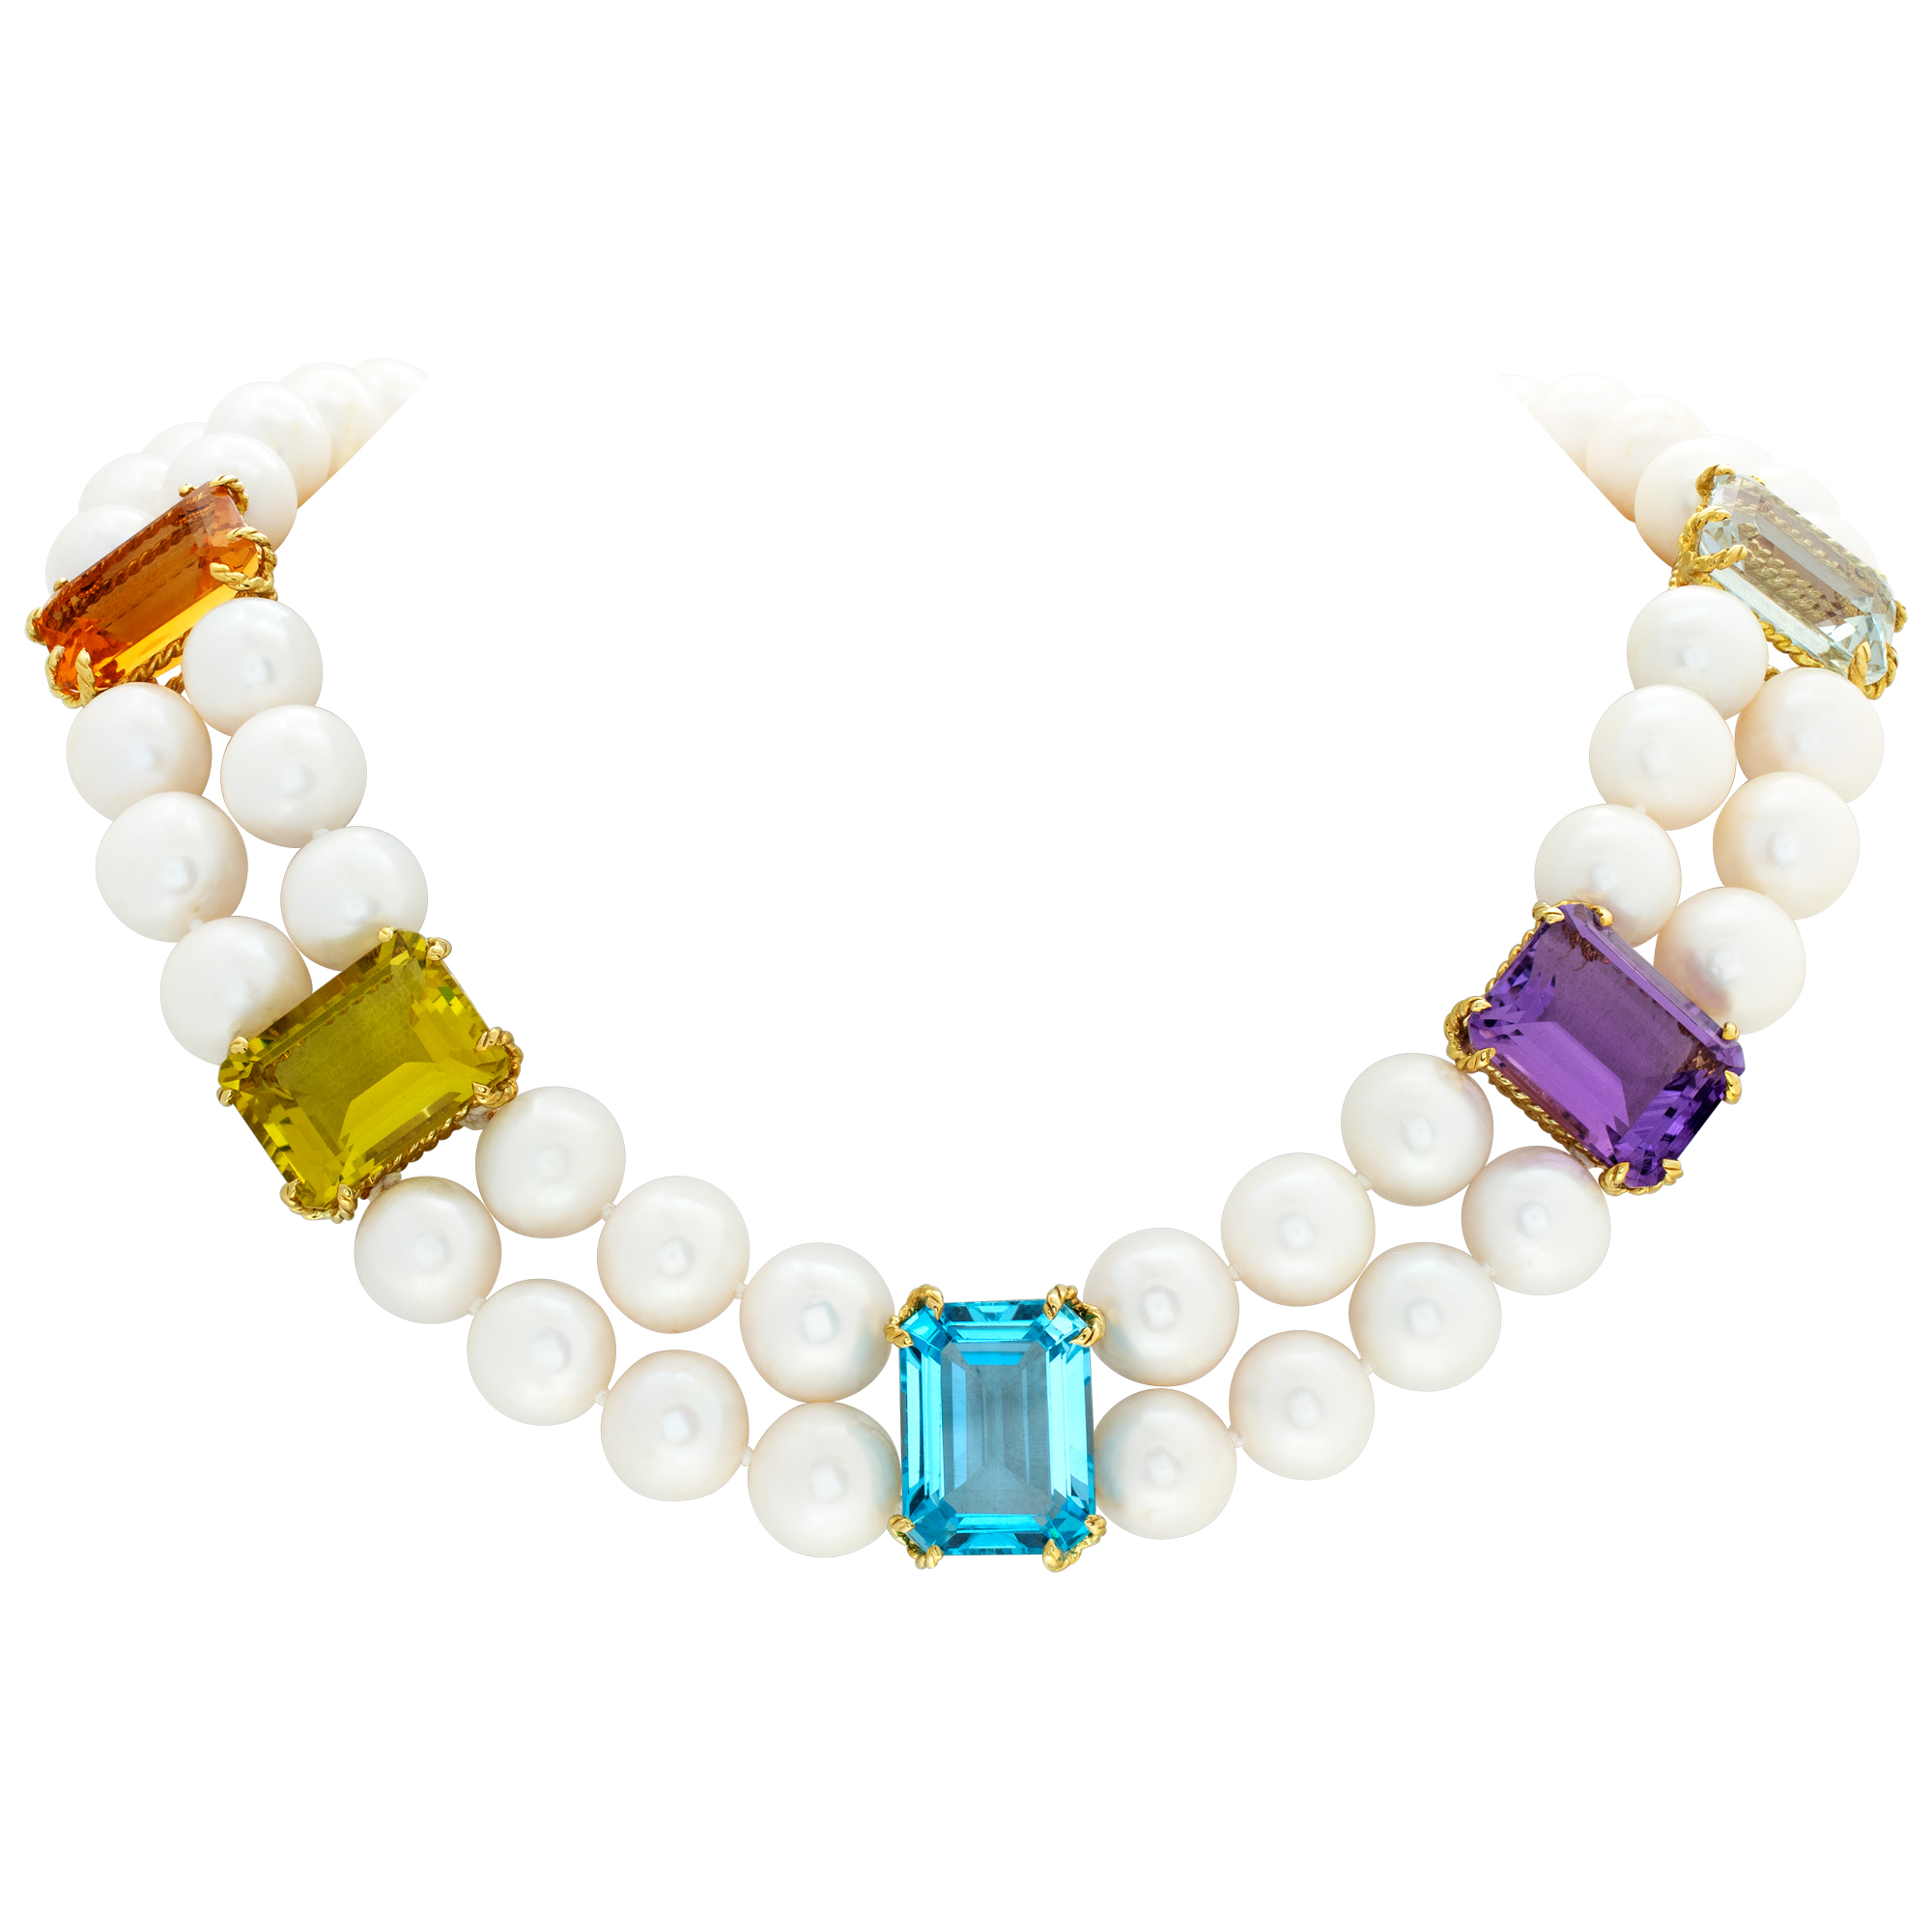 Scully & Scully Multicolor Gemstone & Pearl Necklace with 18k yellow gold setting image 1